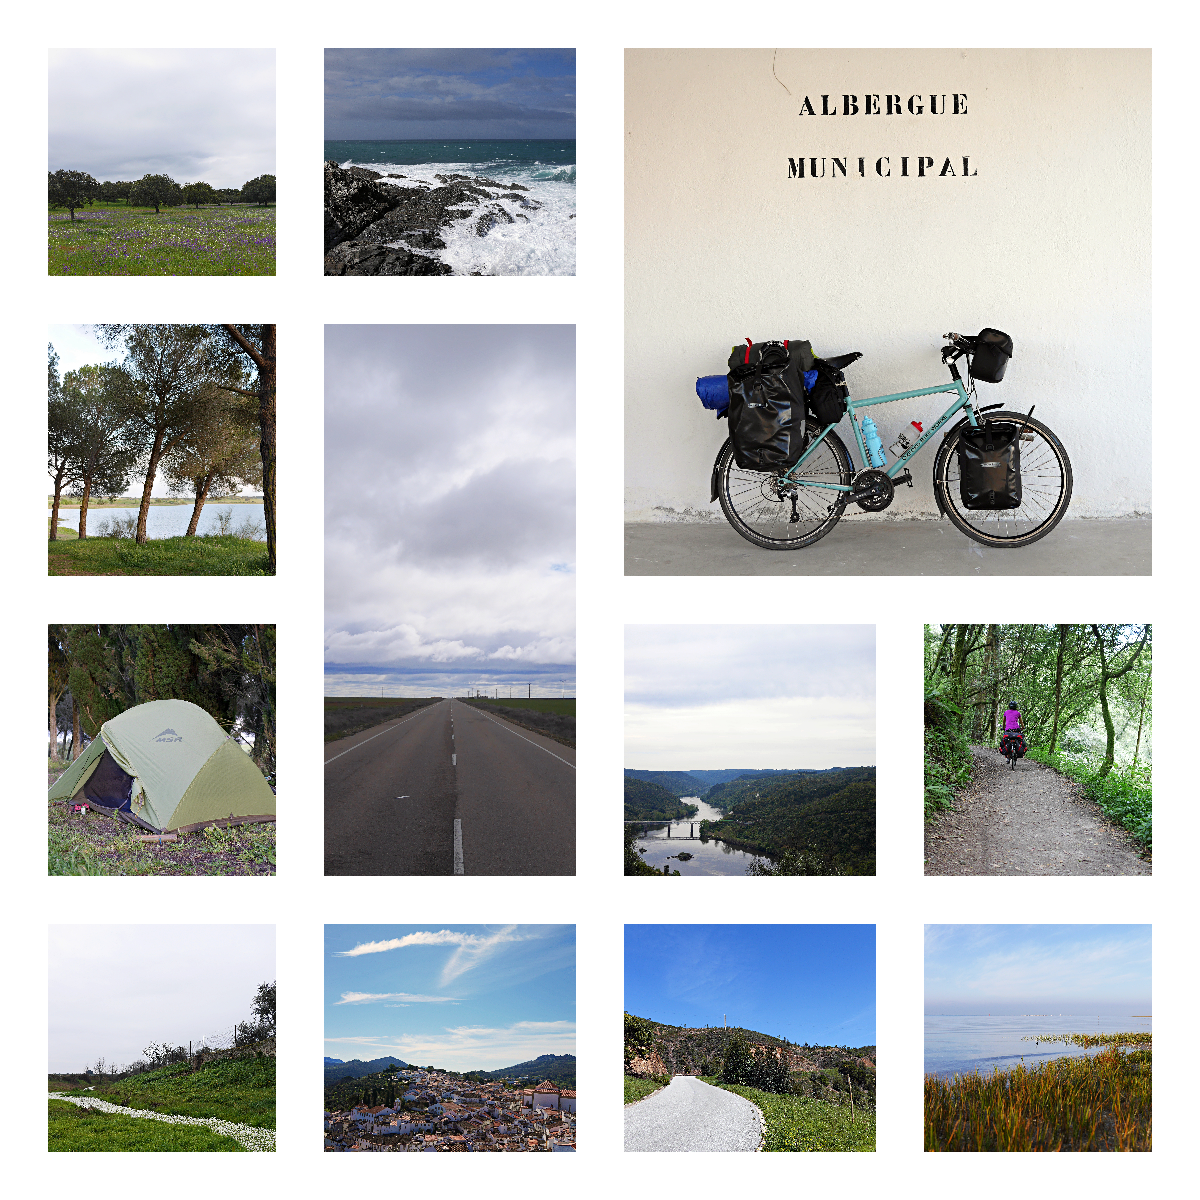 A collage of images made during the cycle tour. The images include roads, waves, other cyclist, a bicycle agaisnt a wall, peaceful lakeside.